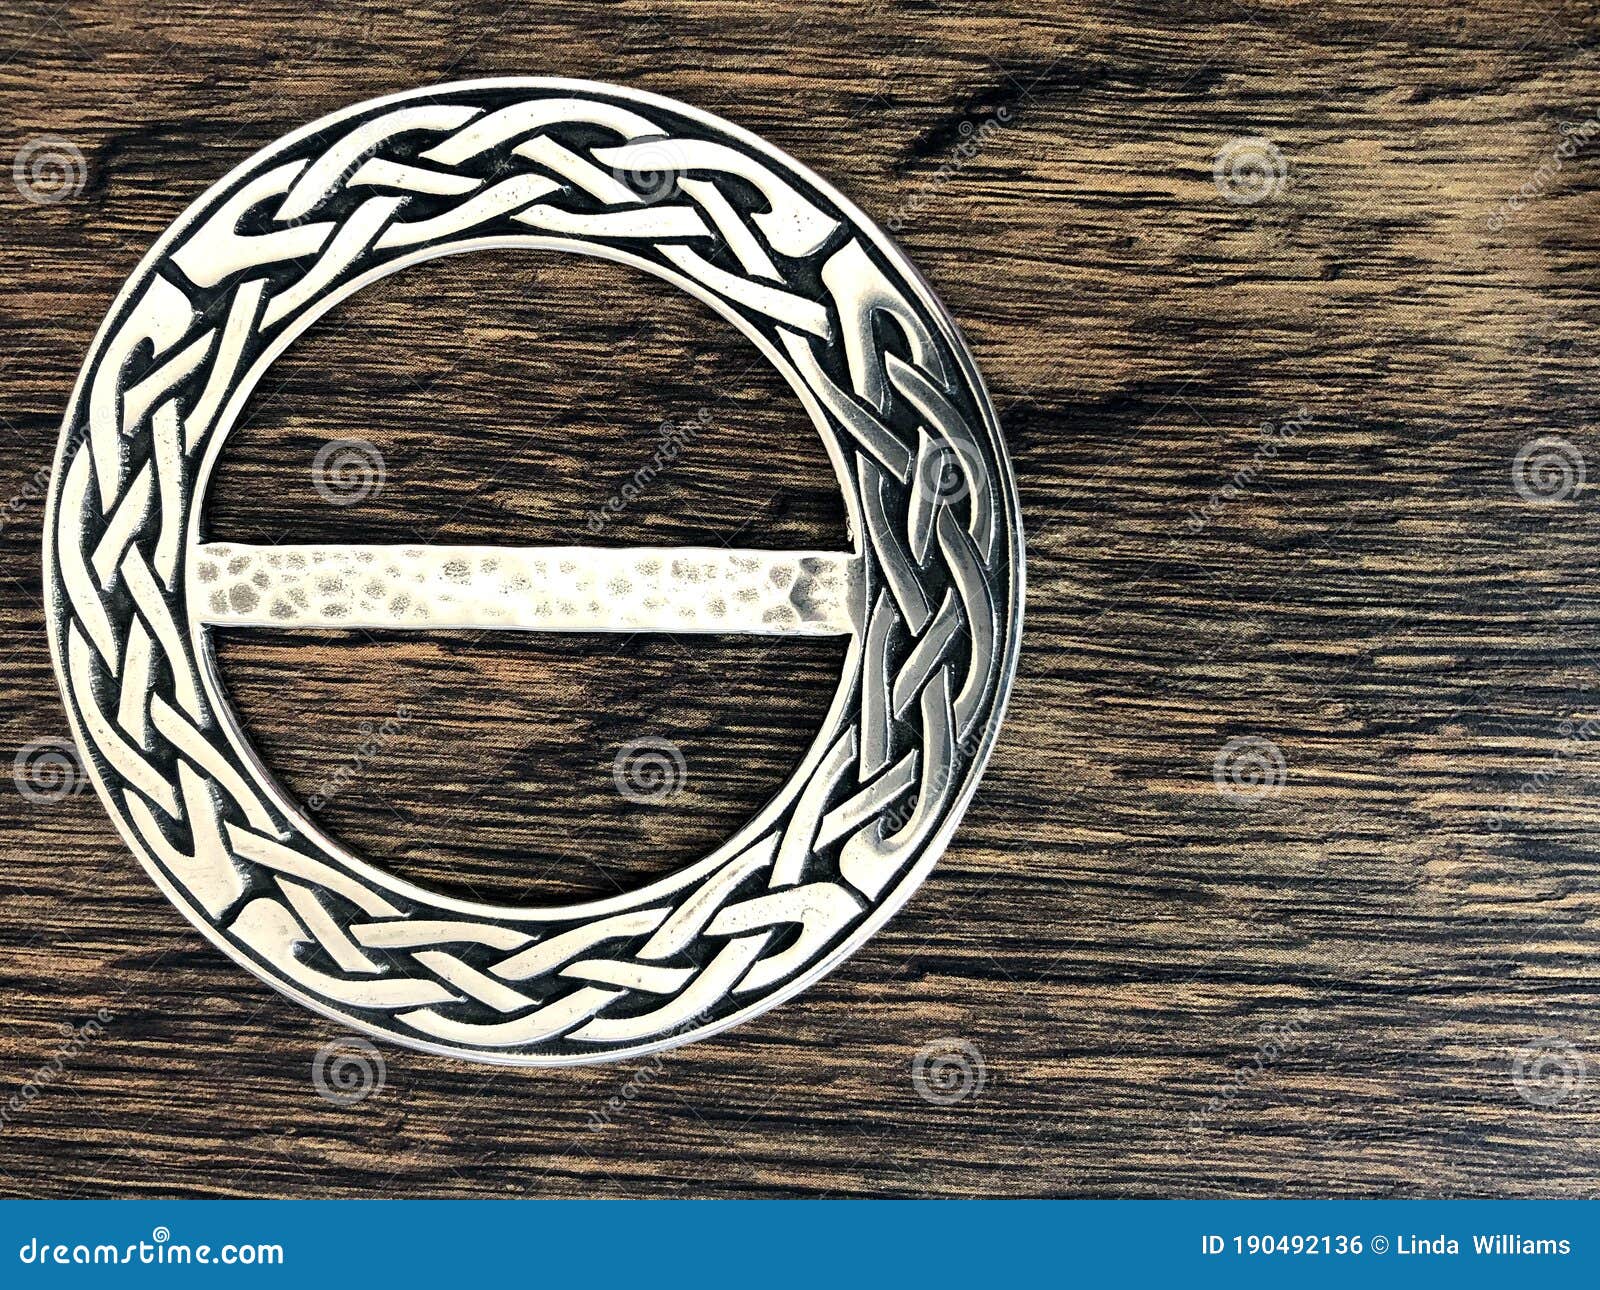 Celtic Knot Scarf Ring on Light Wood Stock Image - Image of plaid